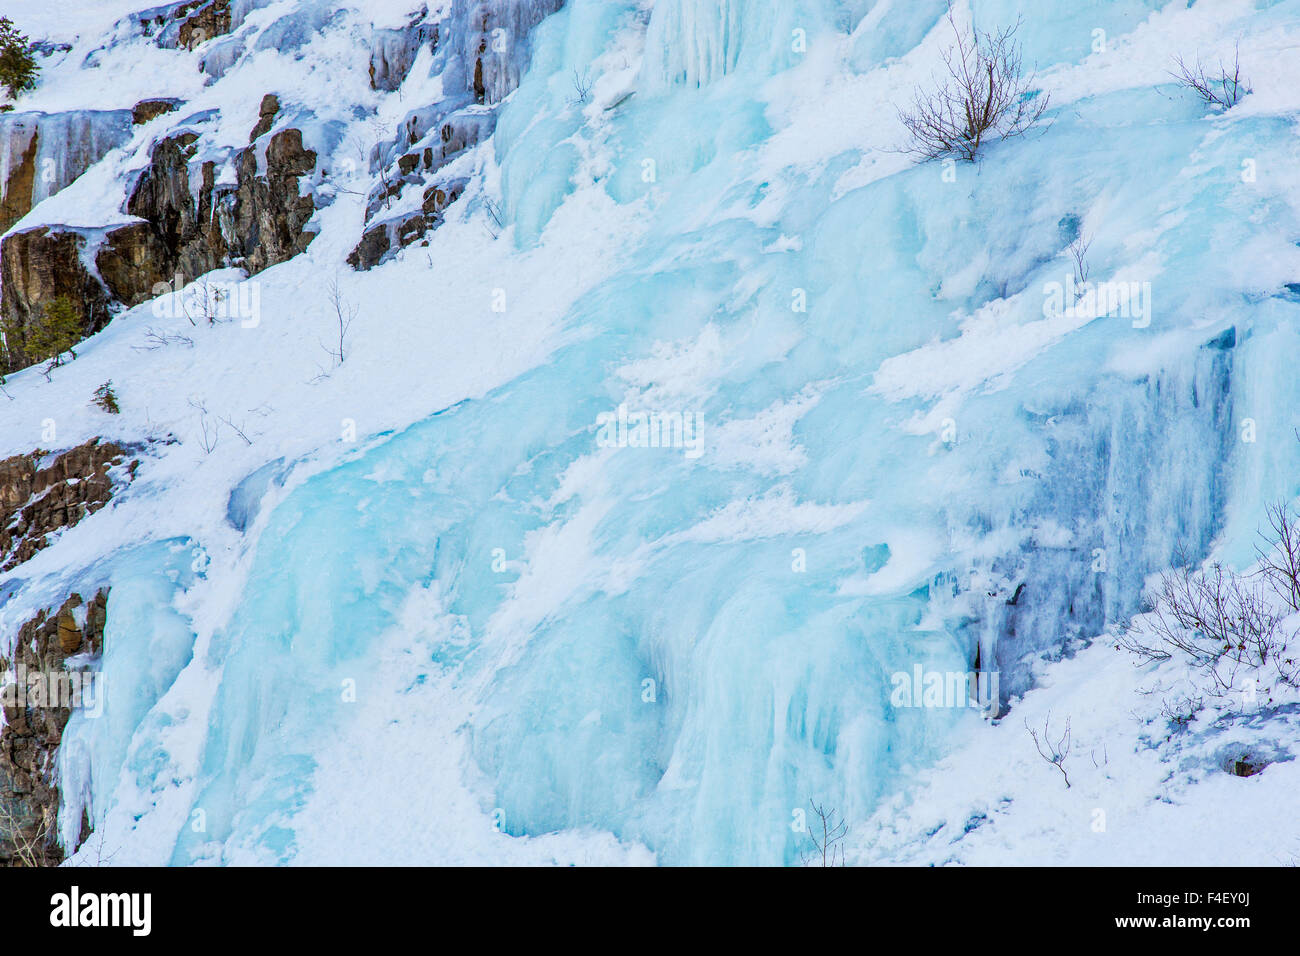 Blue ice seeps from rocks in the Flathead National Forest, Montana, USA. Stock Photo